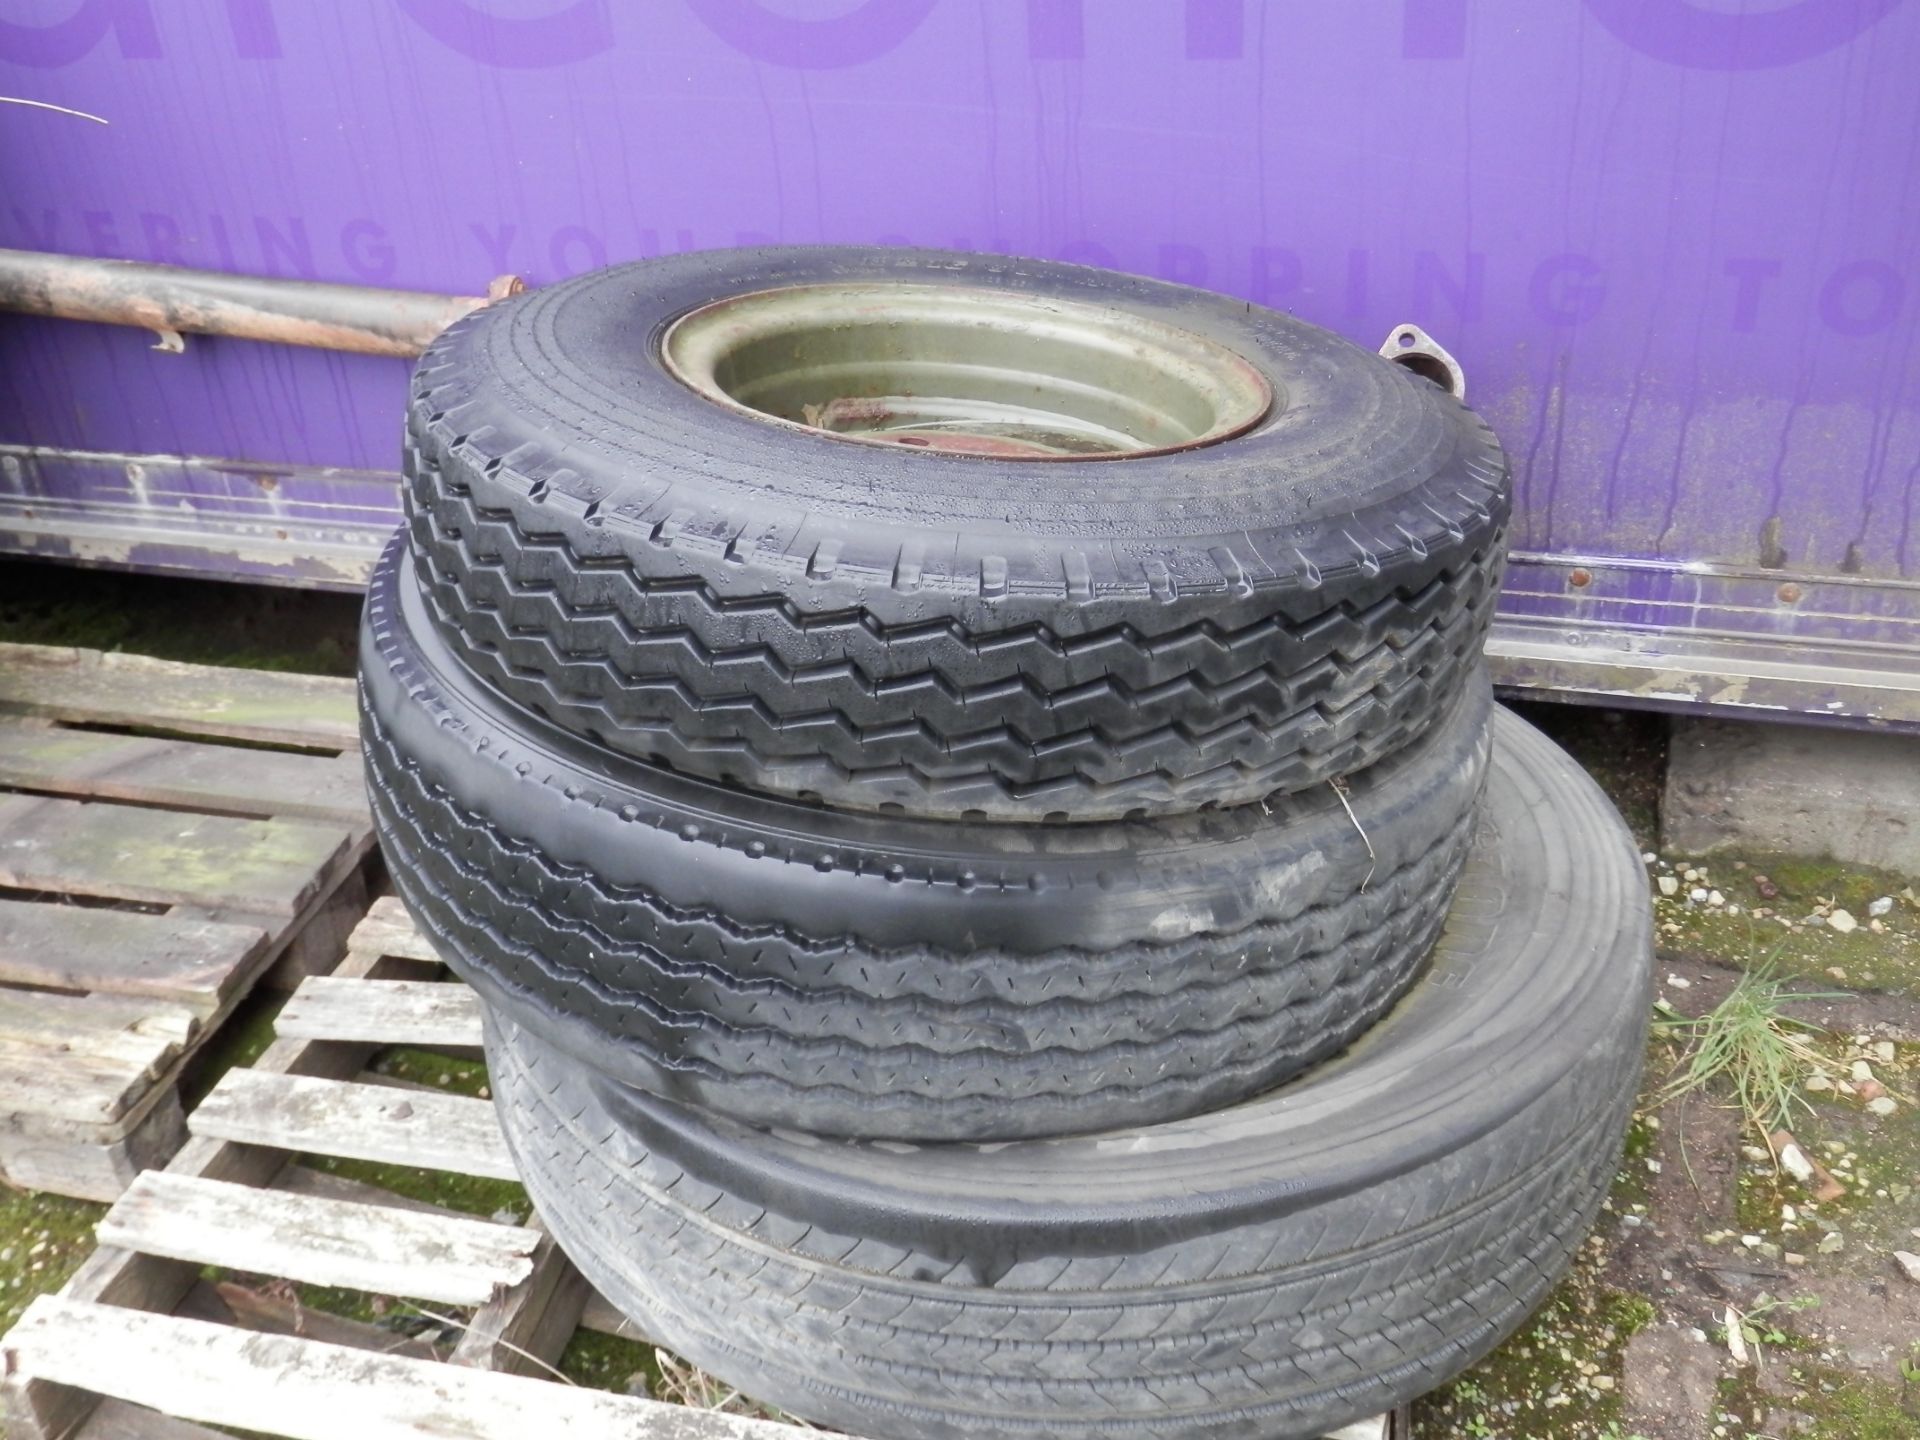 85 + ASSORTED LORRY, CAR & TRAILER TYRES & WHEELS, AS PICTURED. BUYER TO COLLECT COMPLETE JOBLOT. - Image 8 of 10